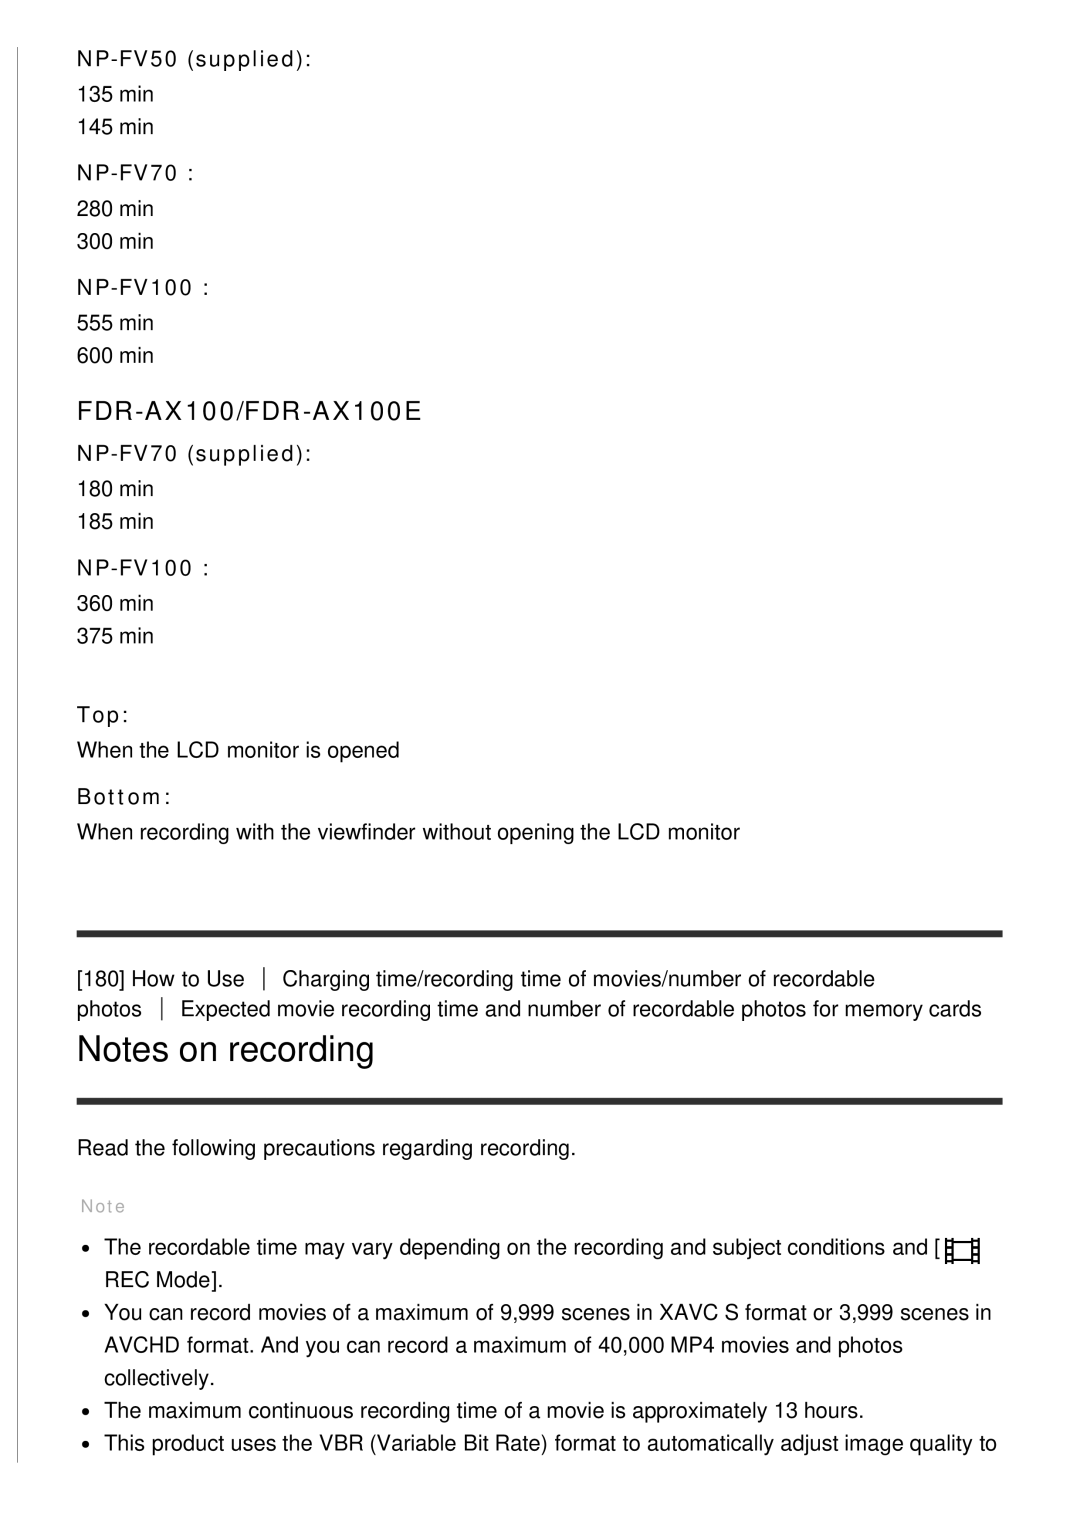 Sony HDR-CX900 manual Notes on recording, FDR-AX100/FDR-AX100E, NP-FV50 supplied, NP-FV70 supplied, NP-FV100, Bottom 